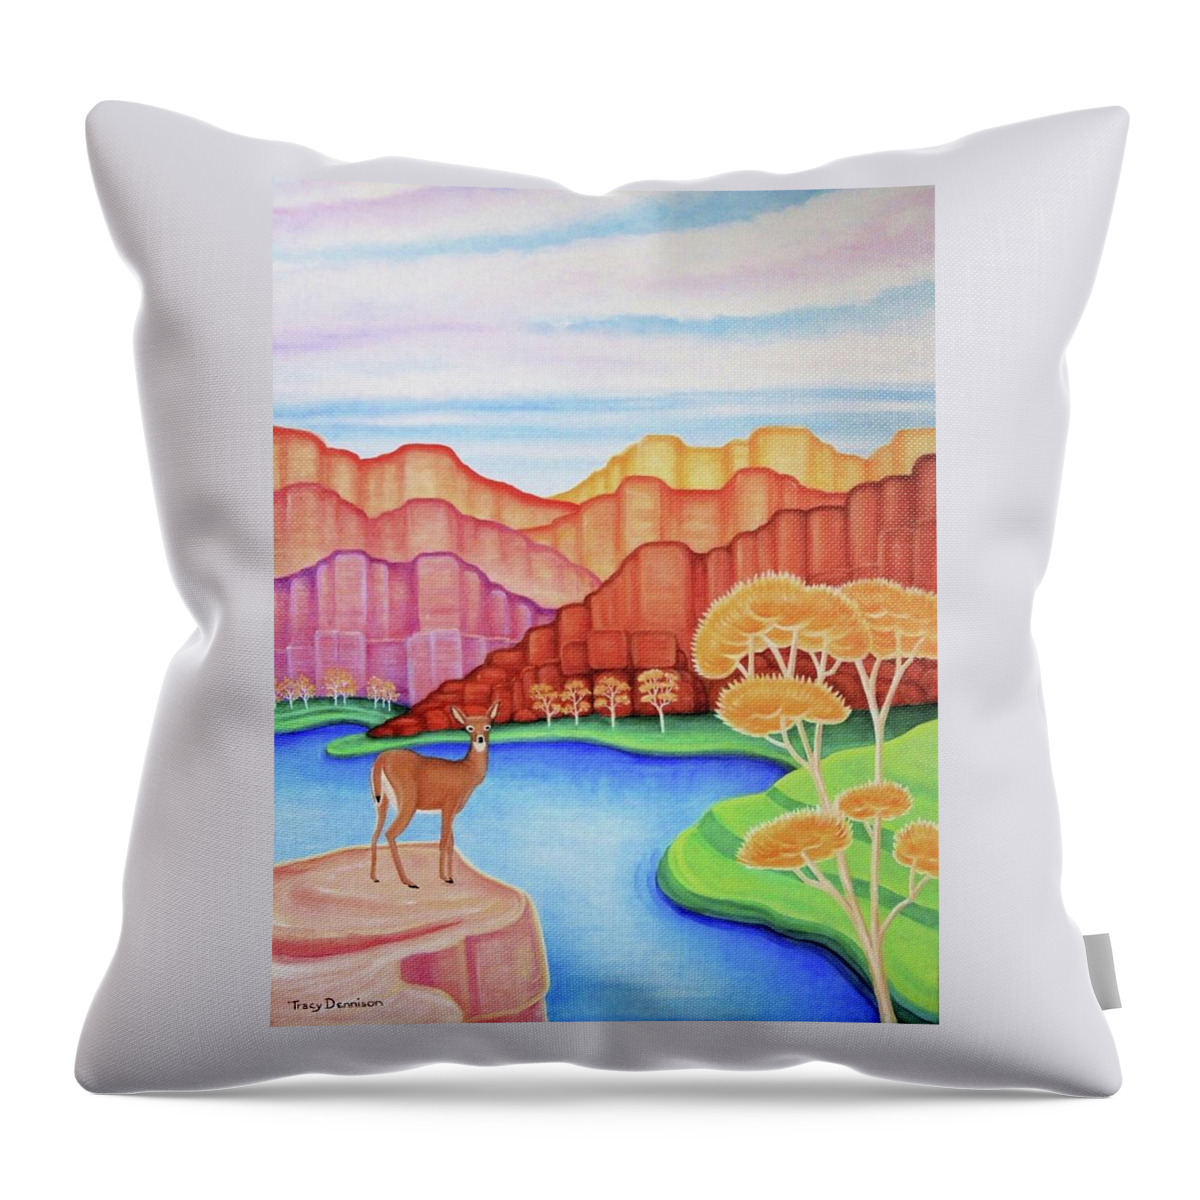 White Tailed Deer Southwest River Landscape Throw Pillow featuring the painting Land of Enchantment by Tracy Dennison